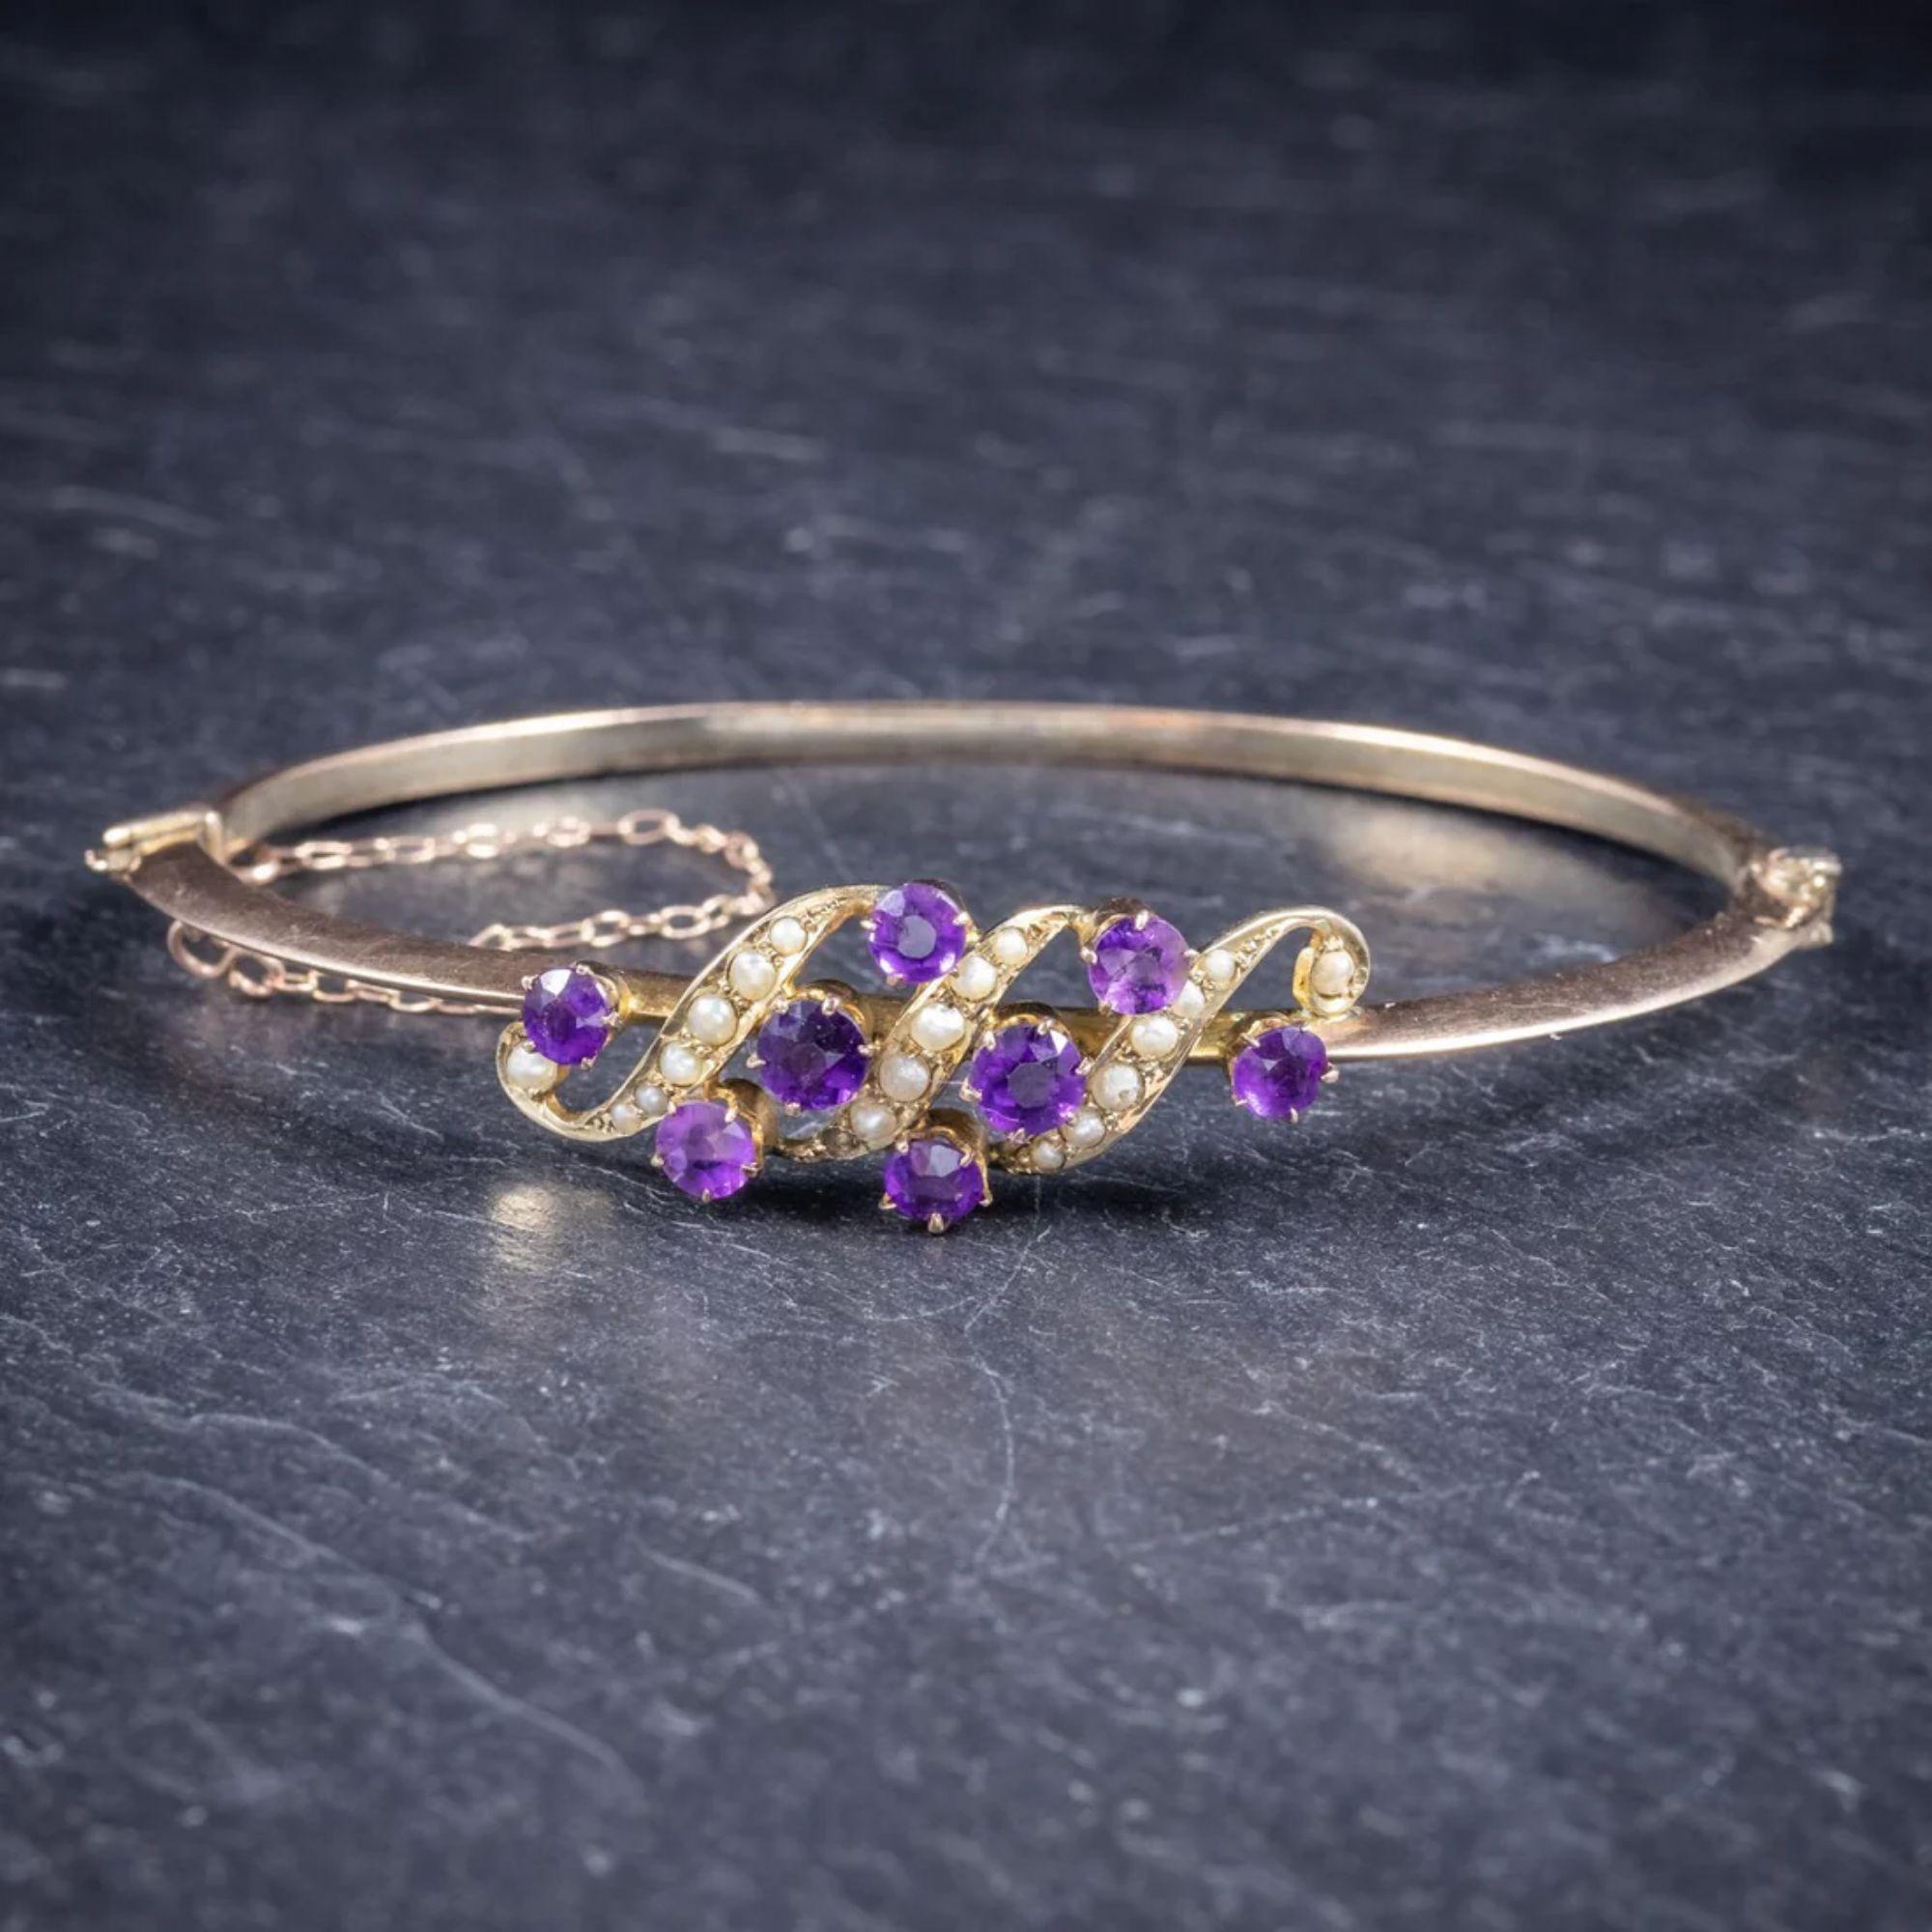 A beautiful antique Victorian bangle (C. 1900), featuring a fabulous front gallery adorned with violet Amethysts and natural fresh water Pearls.

The larger two Amethyst are approx. 0.20ct each with smaller 0.18ct Amethyst across the gallery.

The